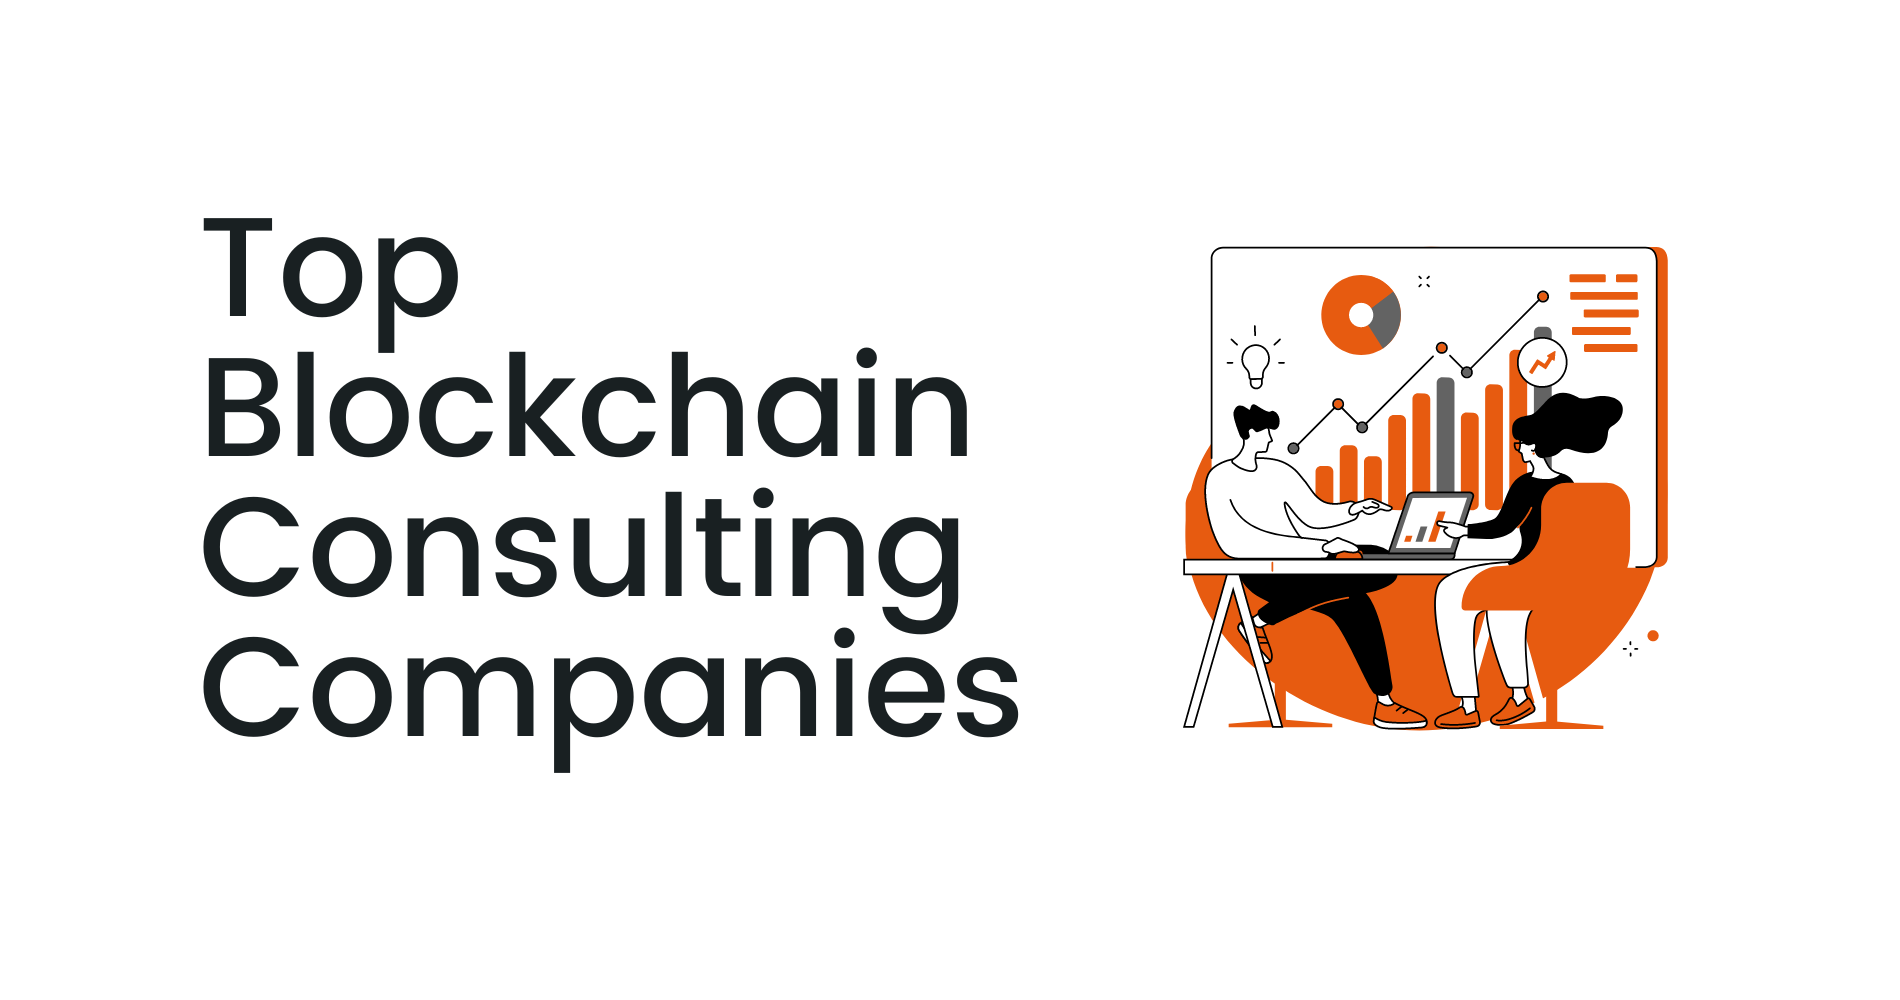 Top Blockchain Consulting Companies